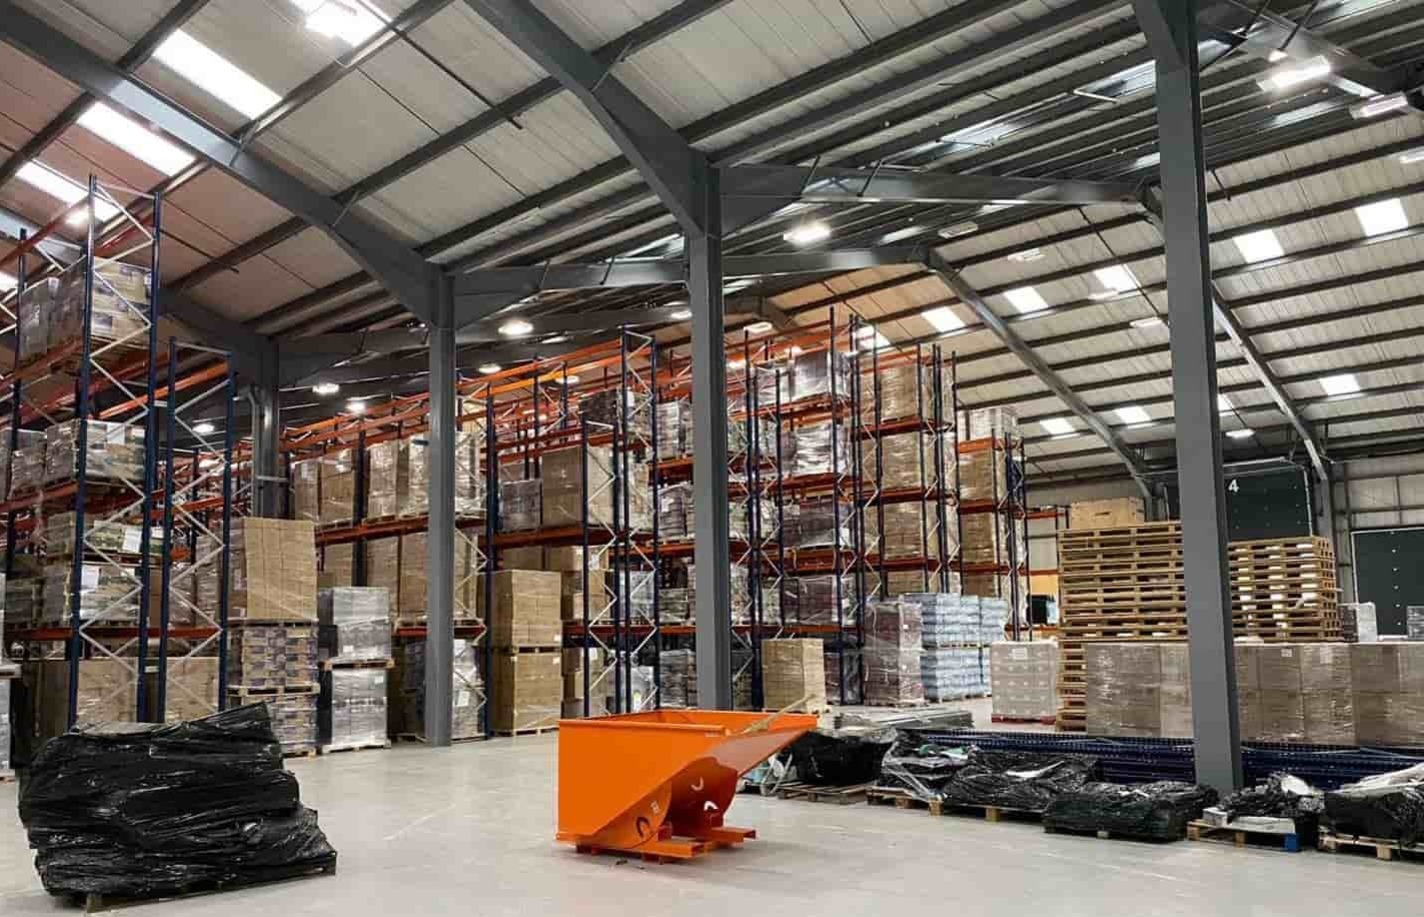 Warehouse lighting is important